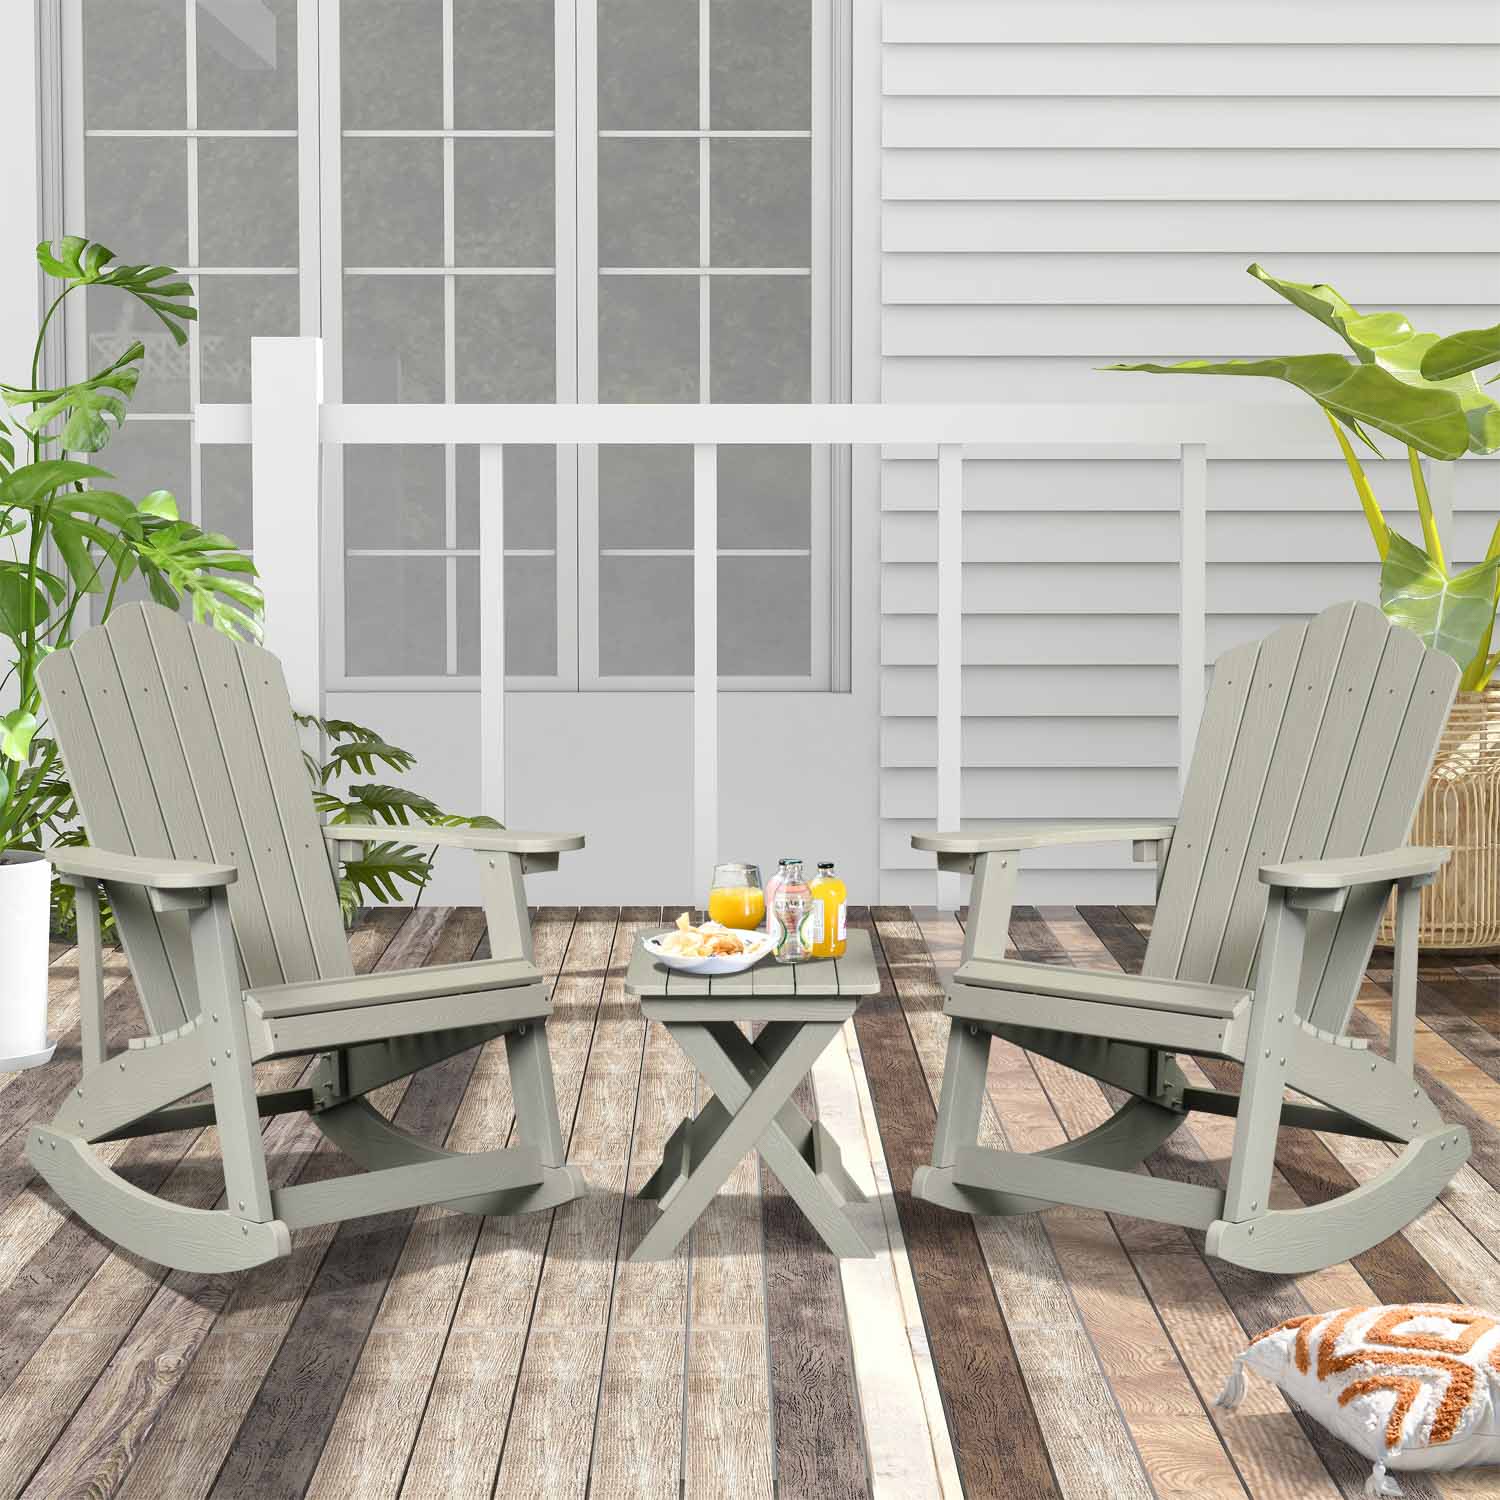 Ovios Patio Table and Chairs 3-Piece with Adirondack Chair and Folded Table